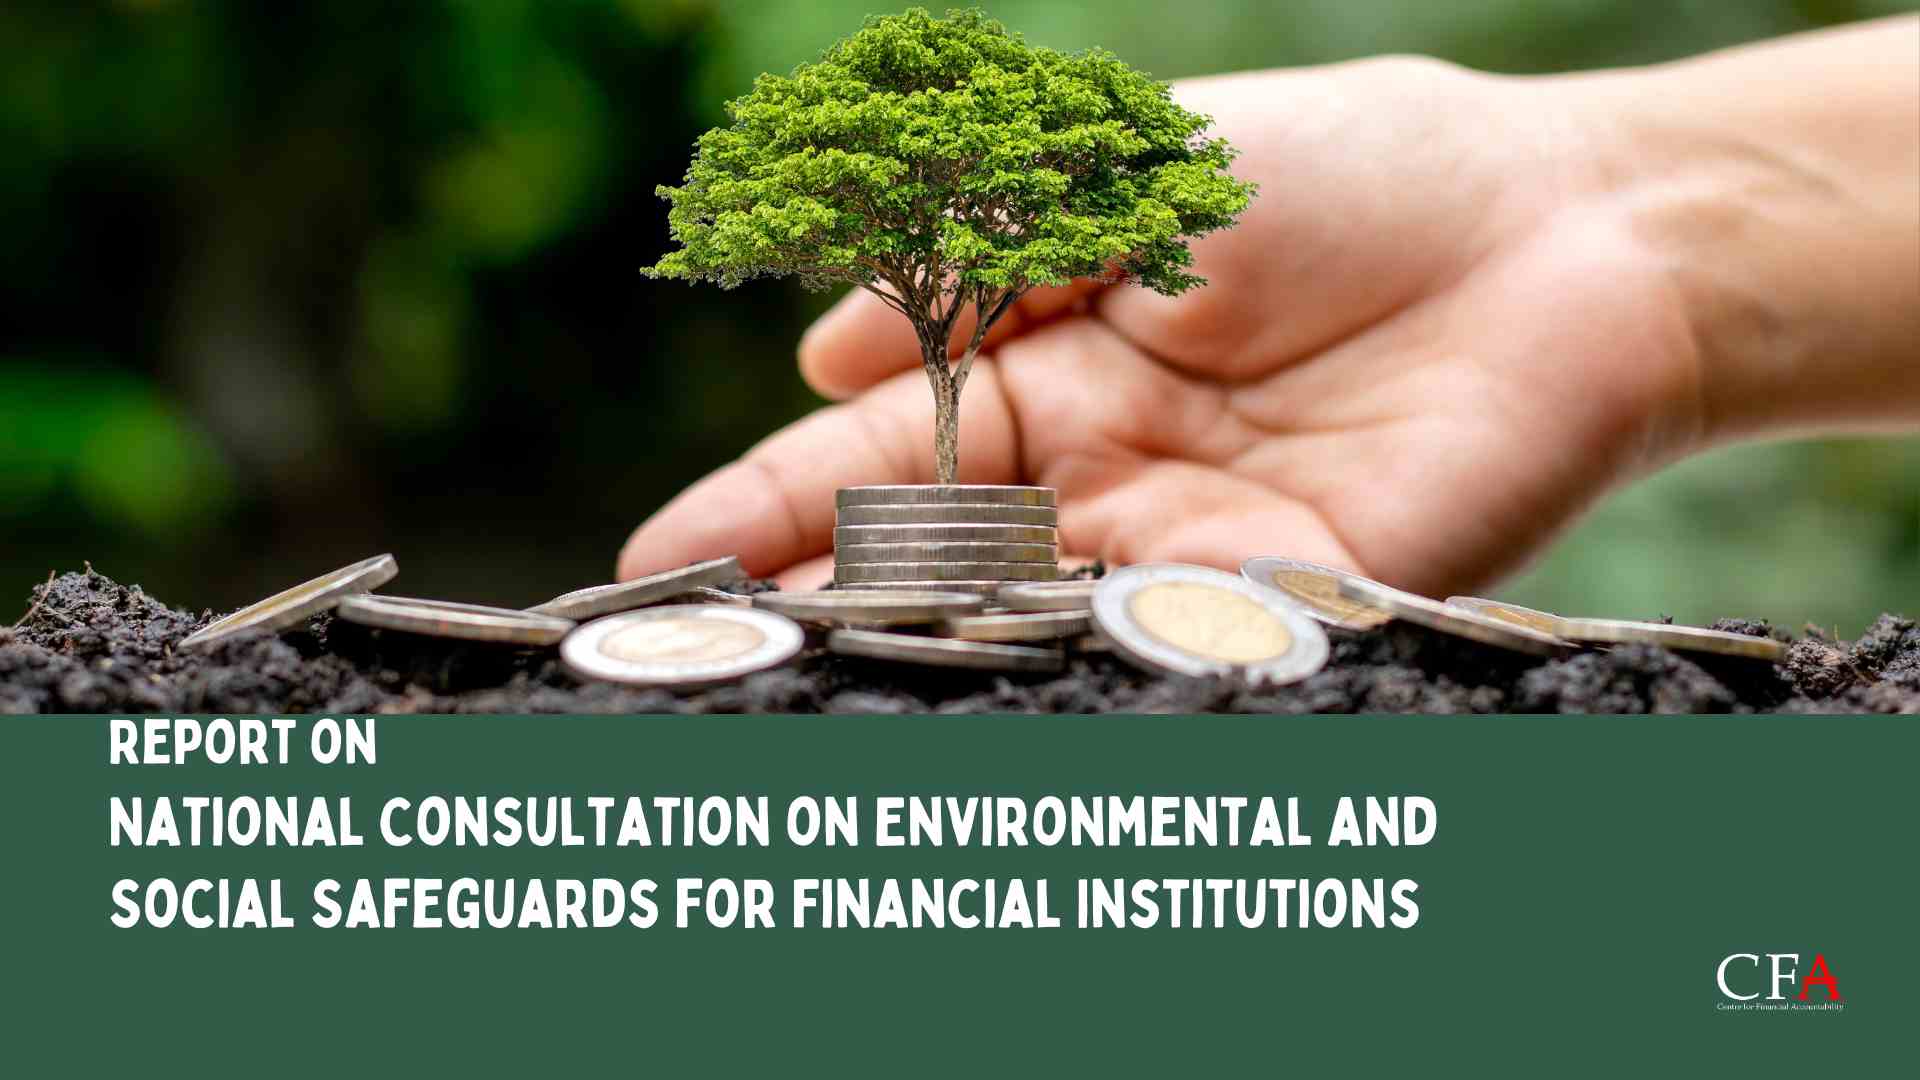 Report on National Consultation on Environmental and Social Safeguards for Financial Institutions